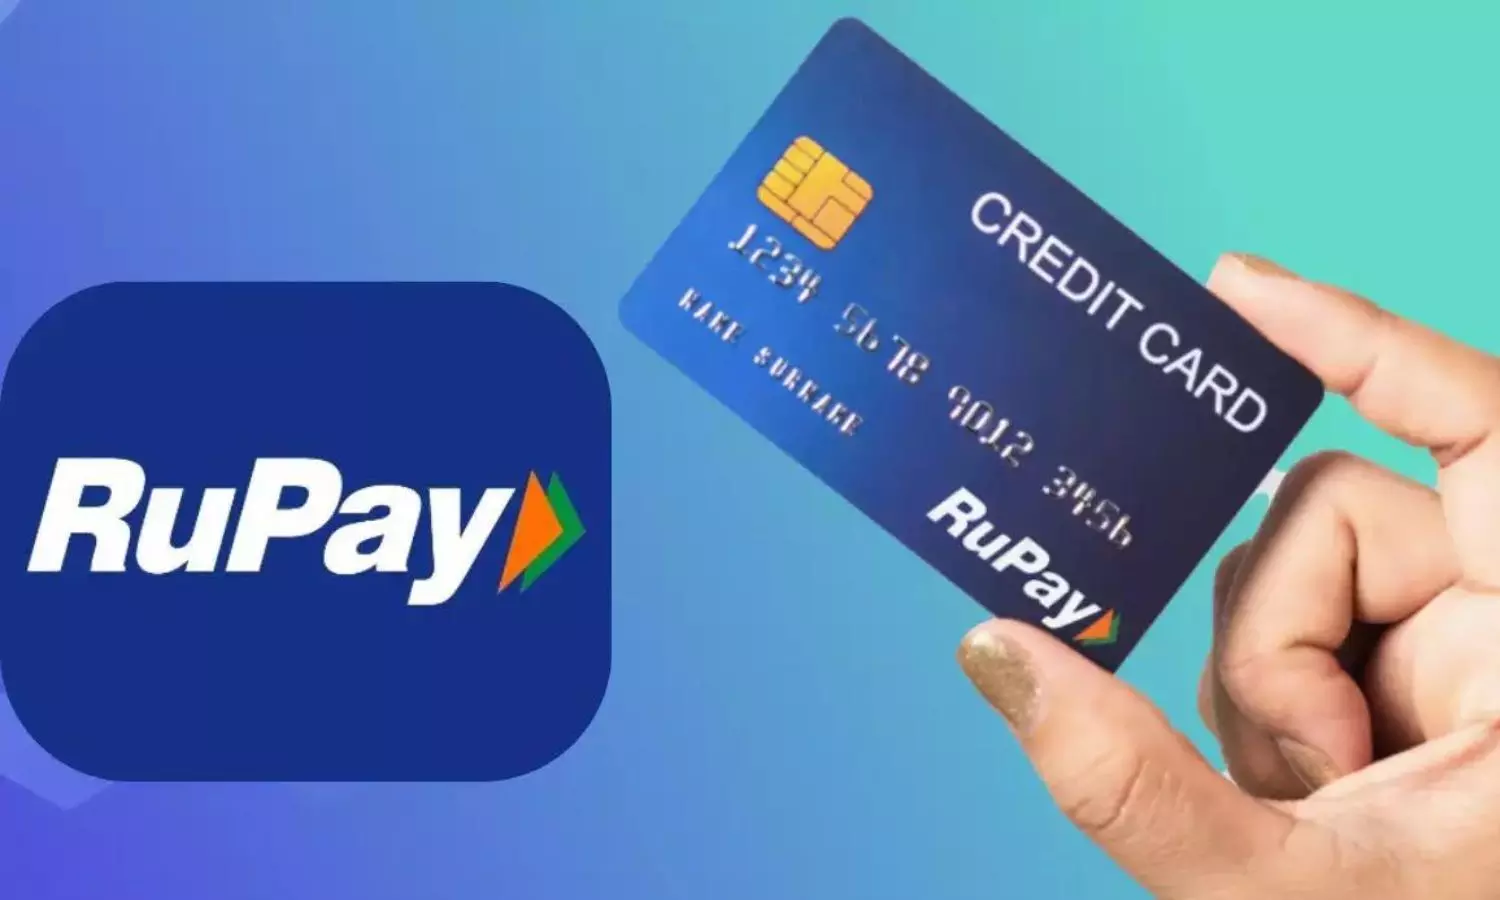 New Rupay credit card feature enables direct EMI application through UPI app